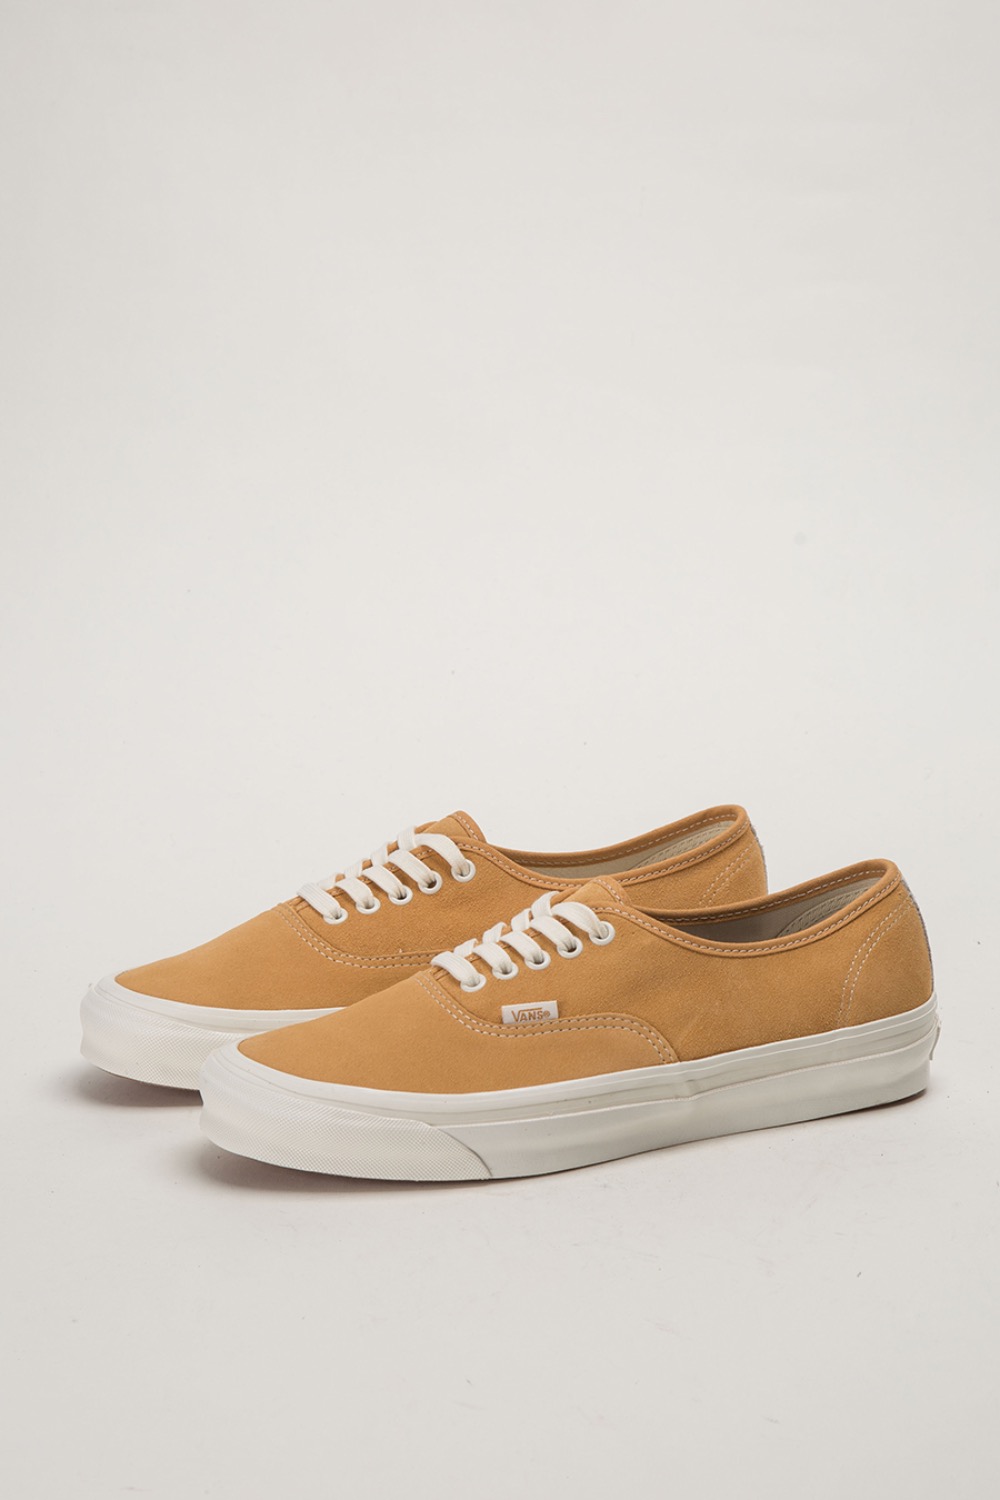 OG AUTHENTIC LX SUEDE YELLOW